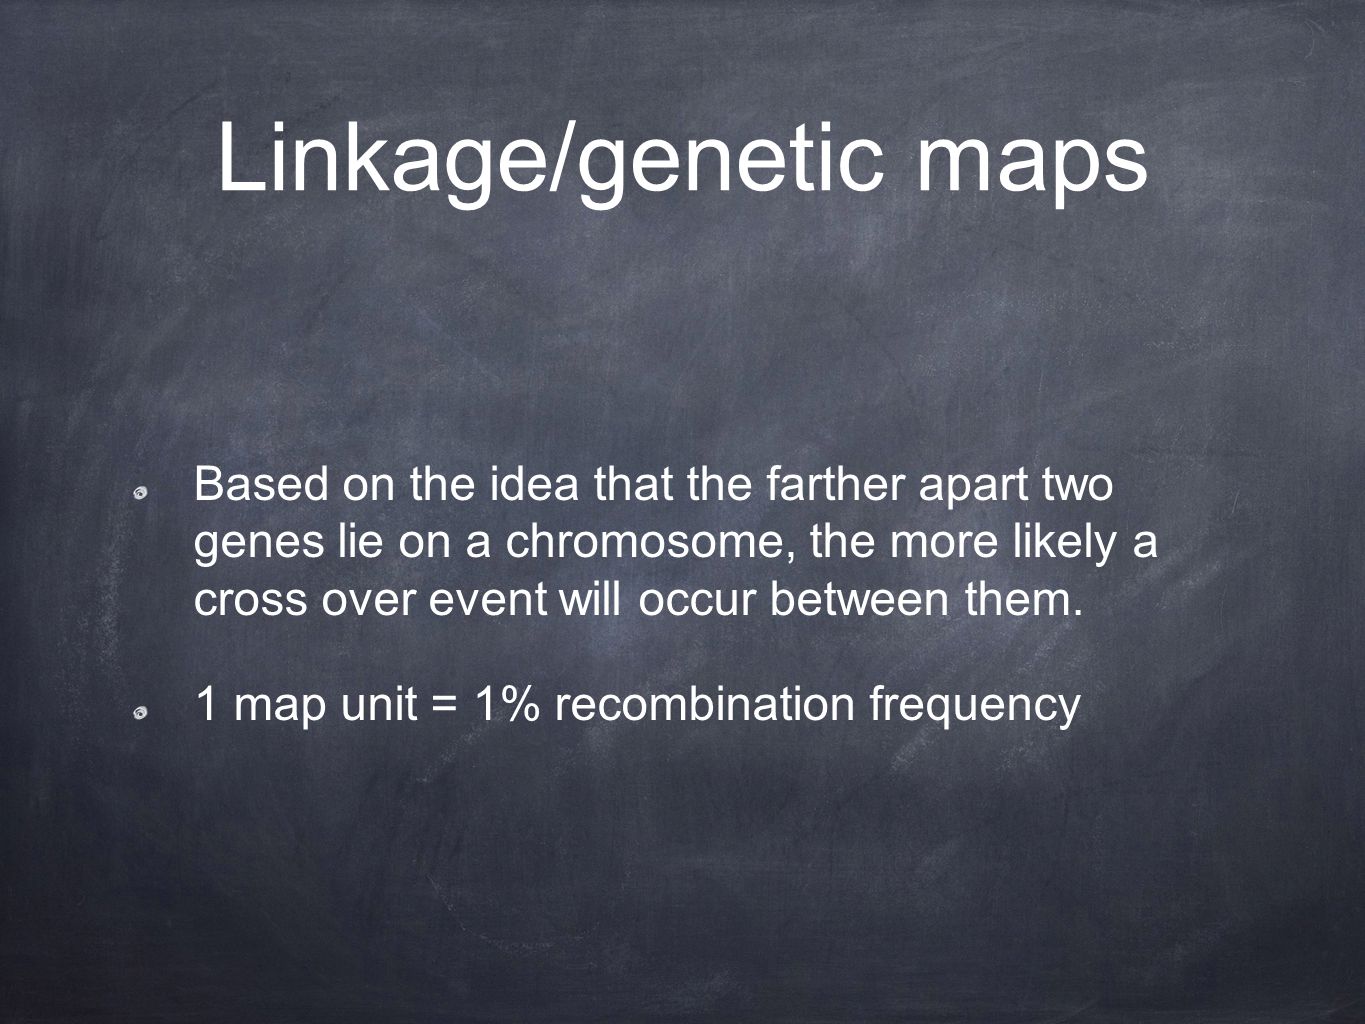 Linkage/genetic maps Based on the idea that the farther apart two genes lie on a chromosome, the more likely a cross over event will occur between them.